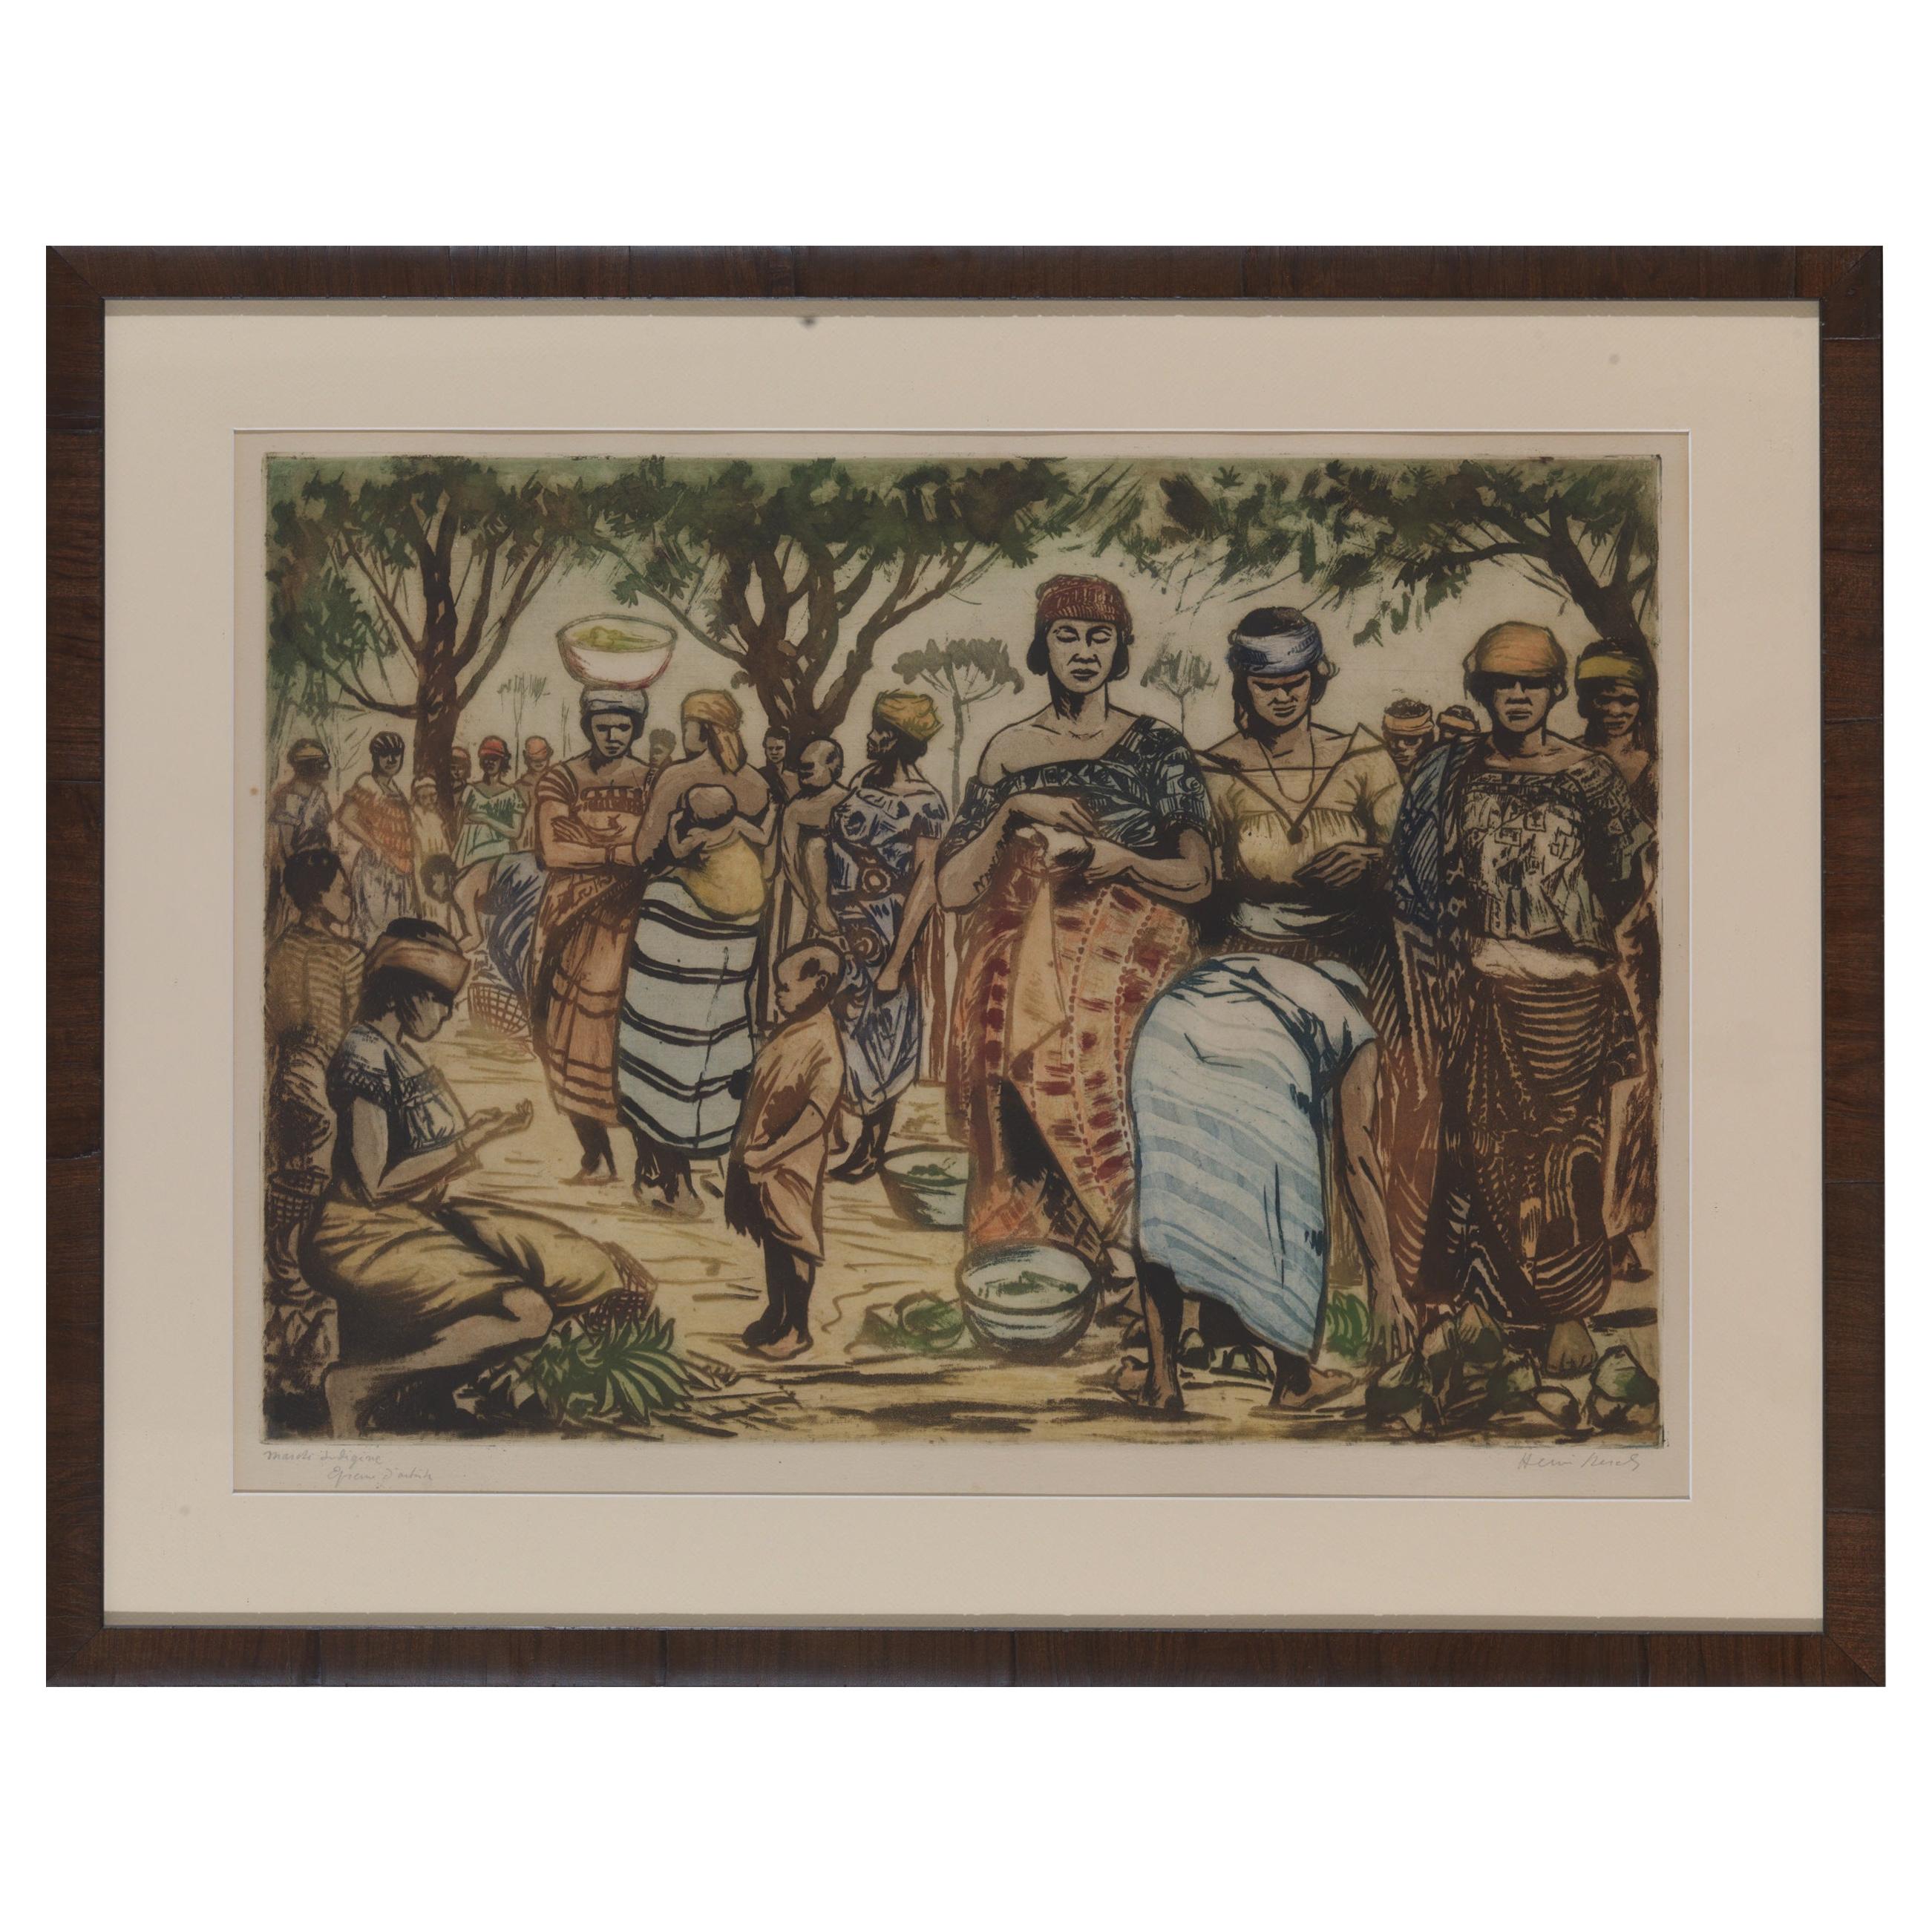 Kerels Henry, Kongo Indigenous Market, Etched and Colored For Sale